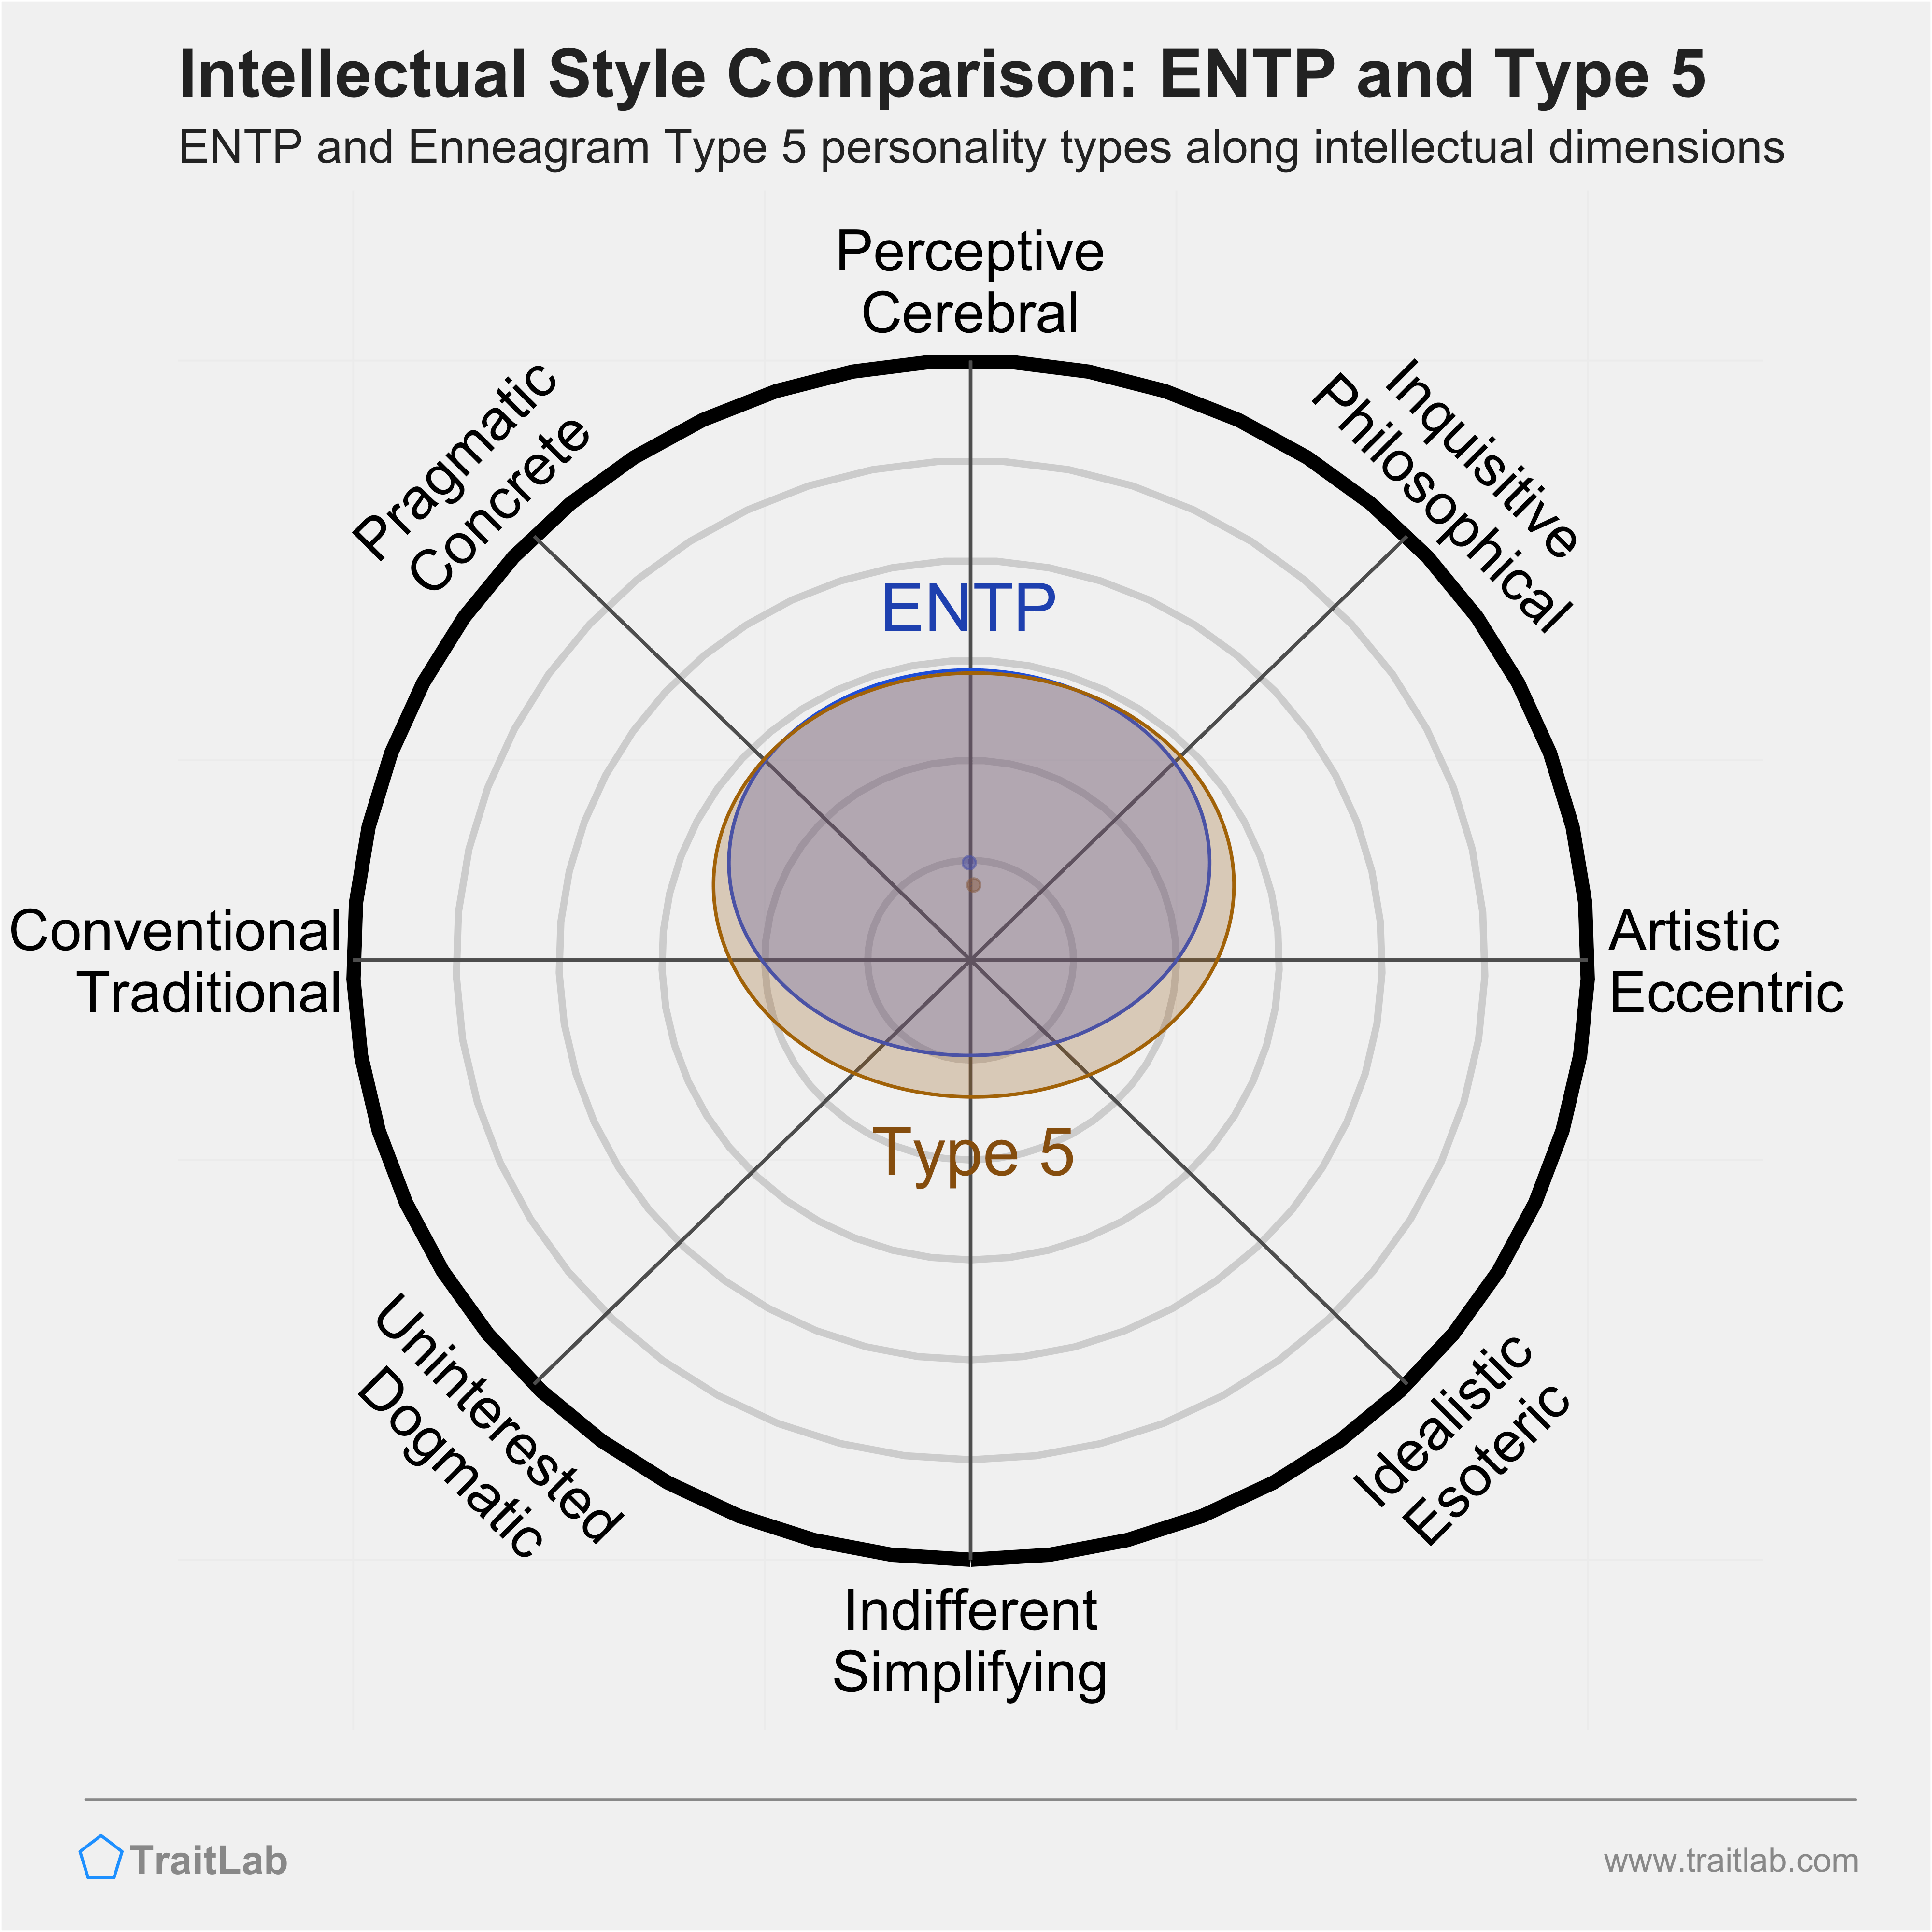 ENTP and Type 5 comparison across intellectual dimensions